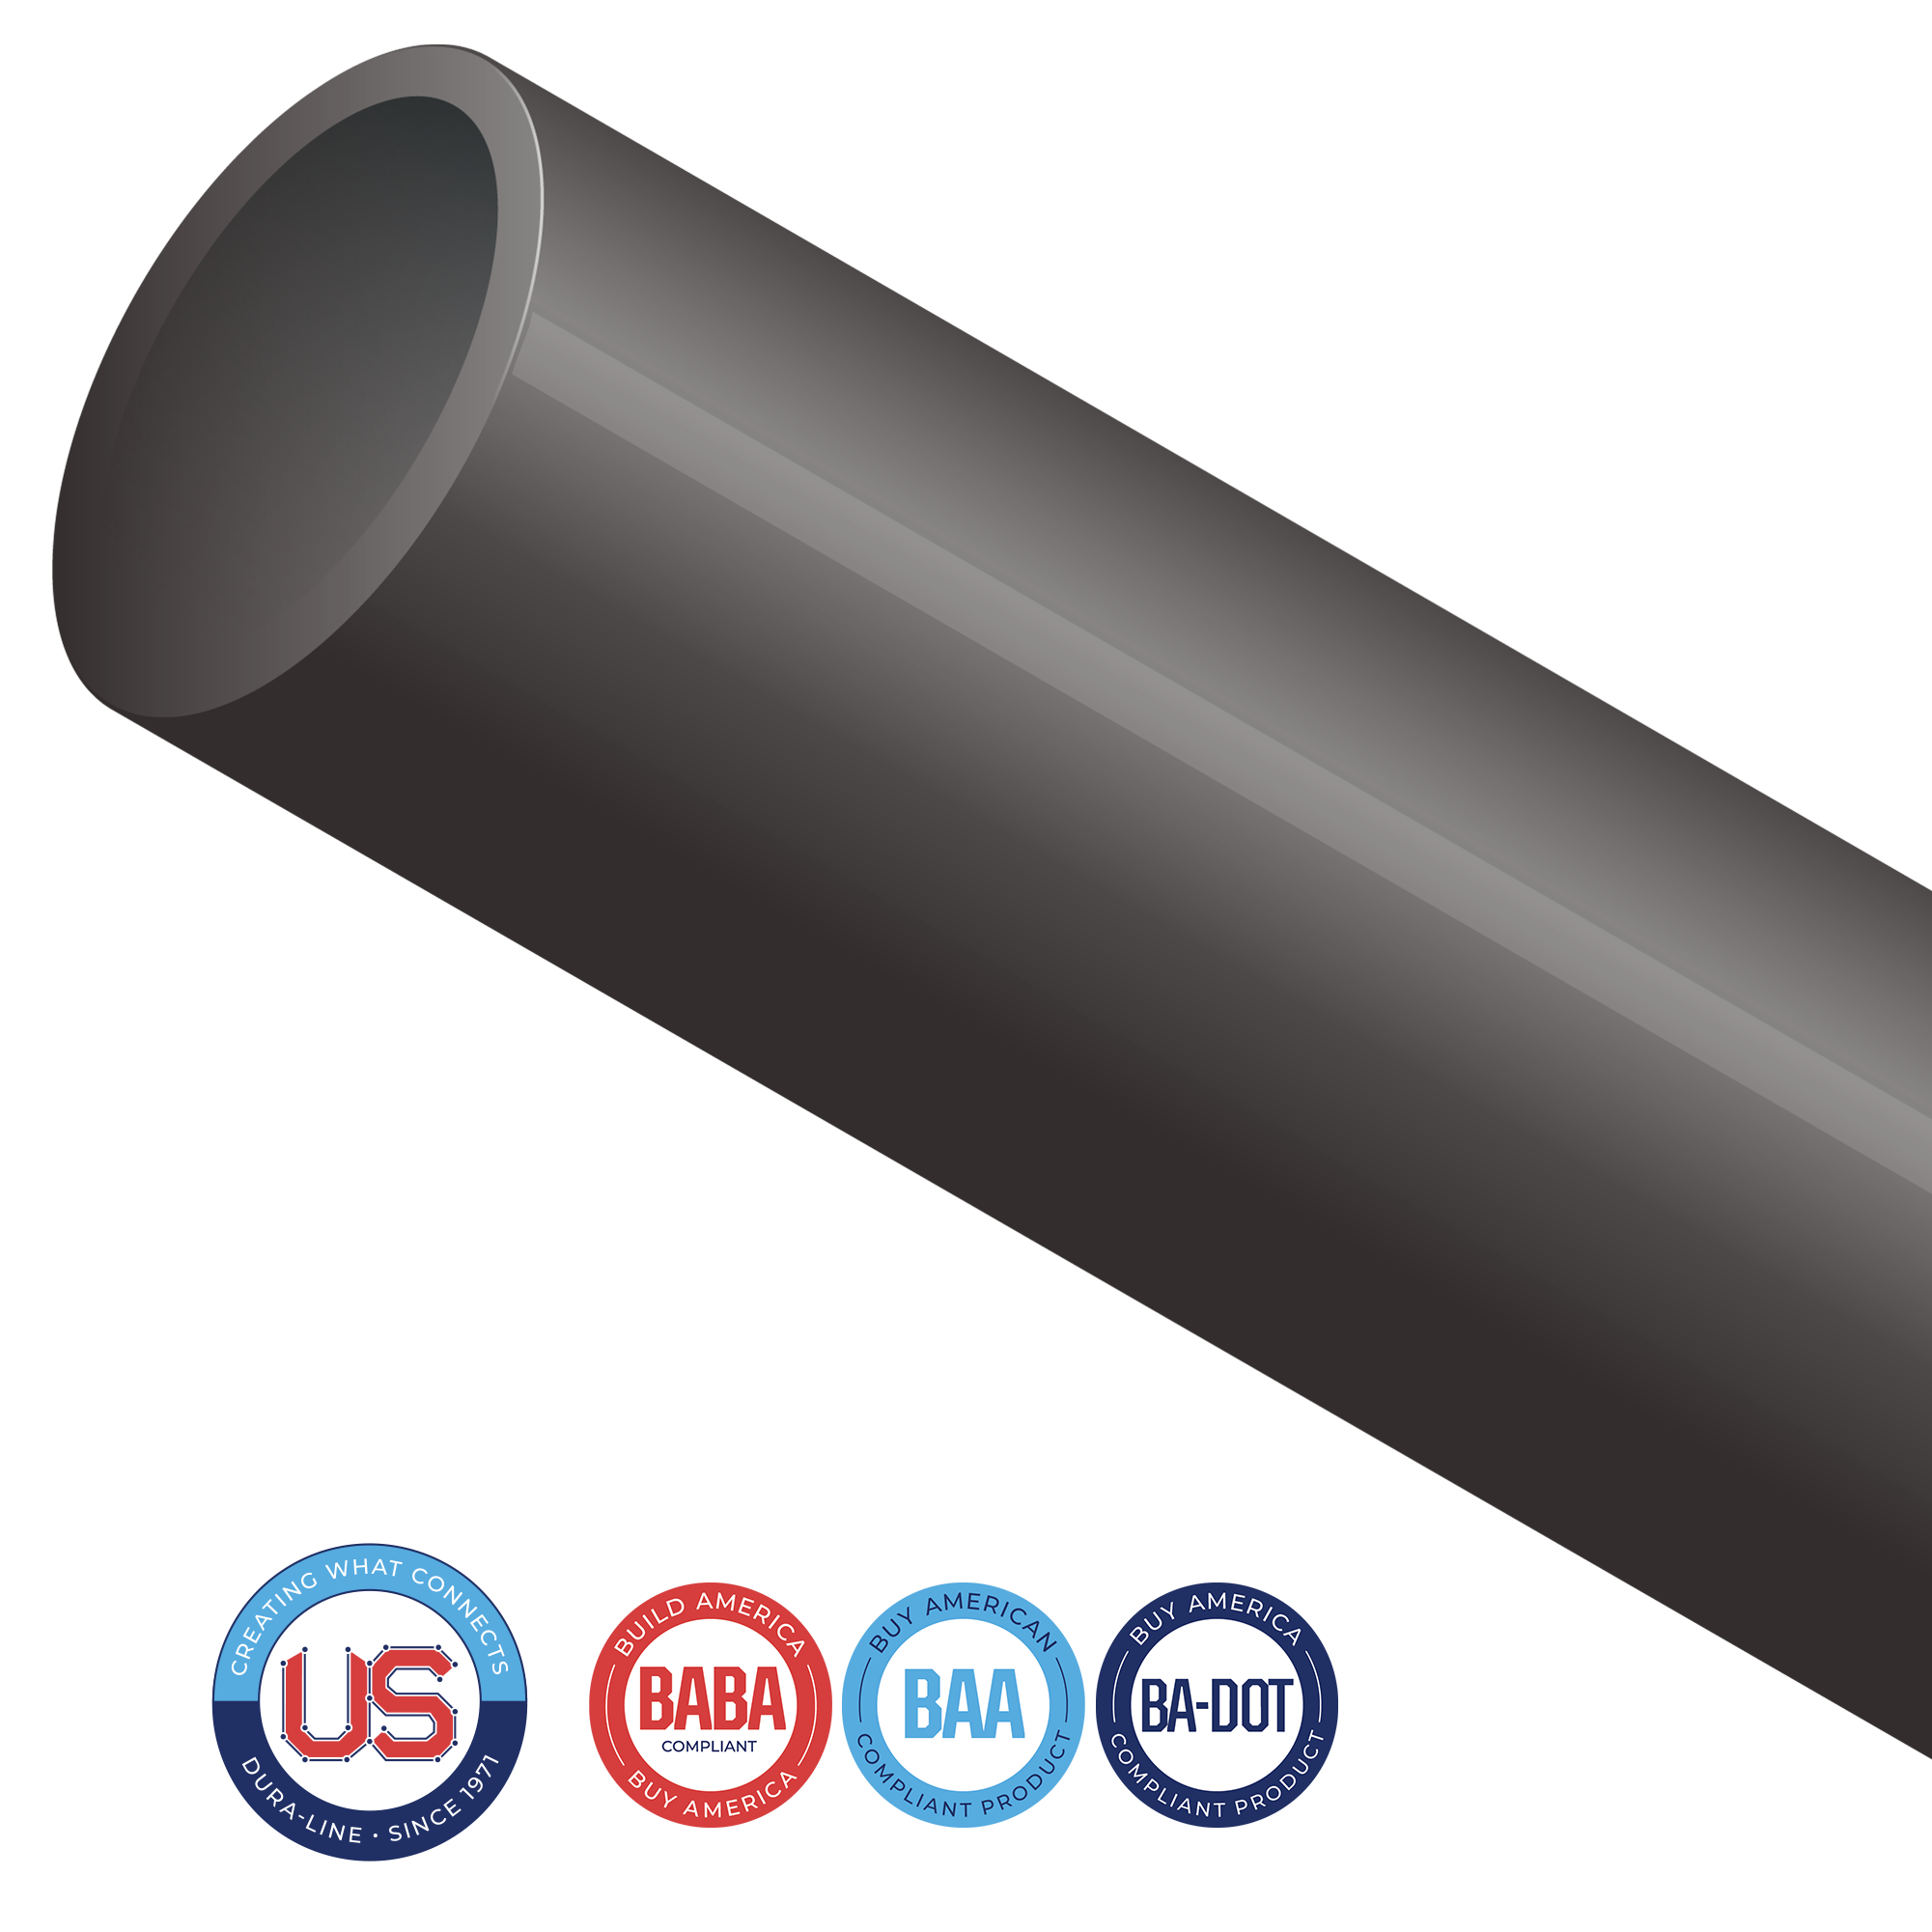 Meets or exceeds the HDPE resin requirements per ASTM D-3350 UV Black (minimum carbon black loading of 2%), Sequential footage markings, permanent ink jet or indent print, tested and listed by Intertek Laboratories (ETL) to assure compliance with UL 651A, certified by Dura-Line to comply with all UL 651A property and testing requirements. 